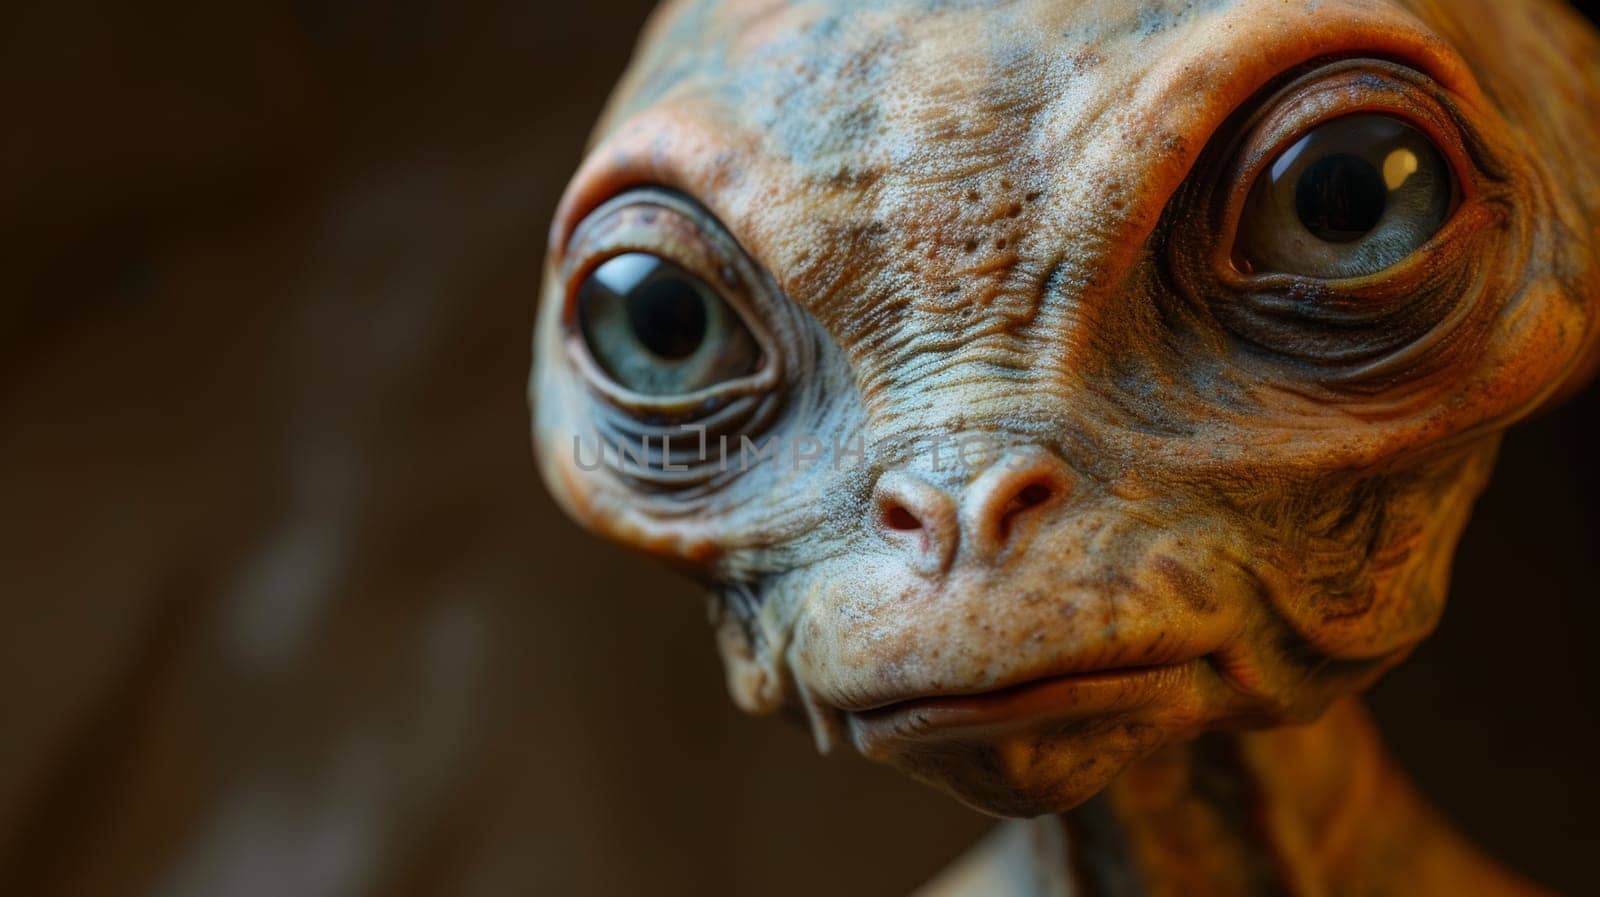 A close up of an alien looking creature with big eyes, AI by starush